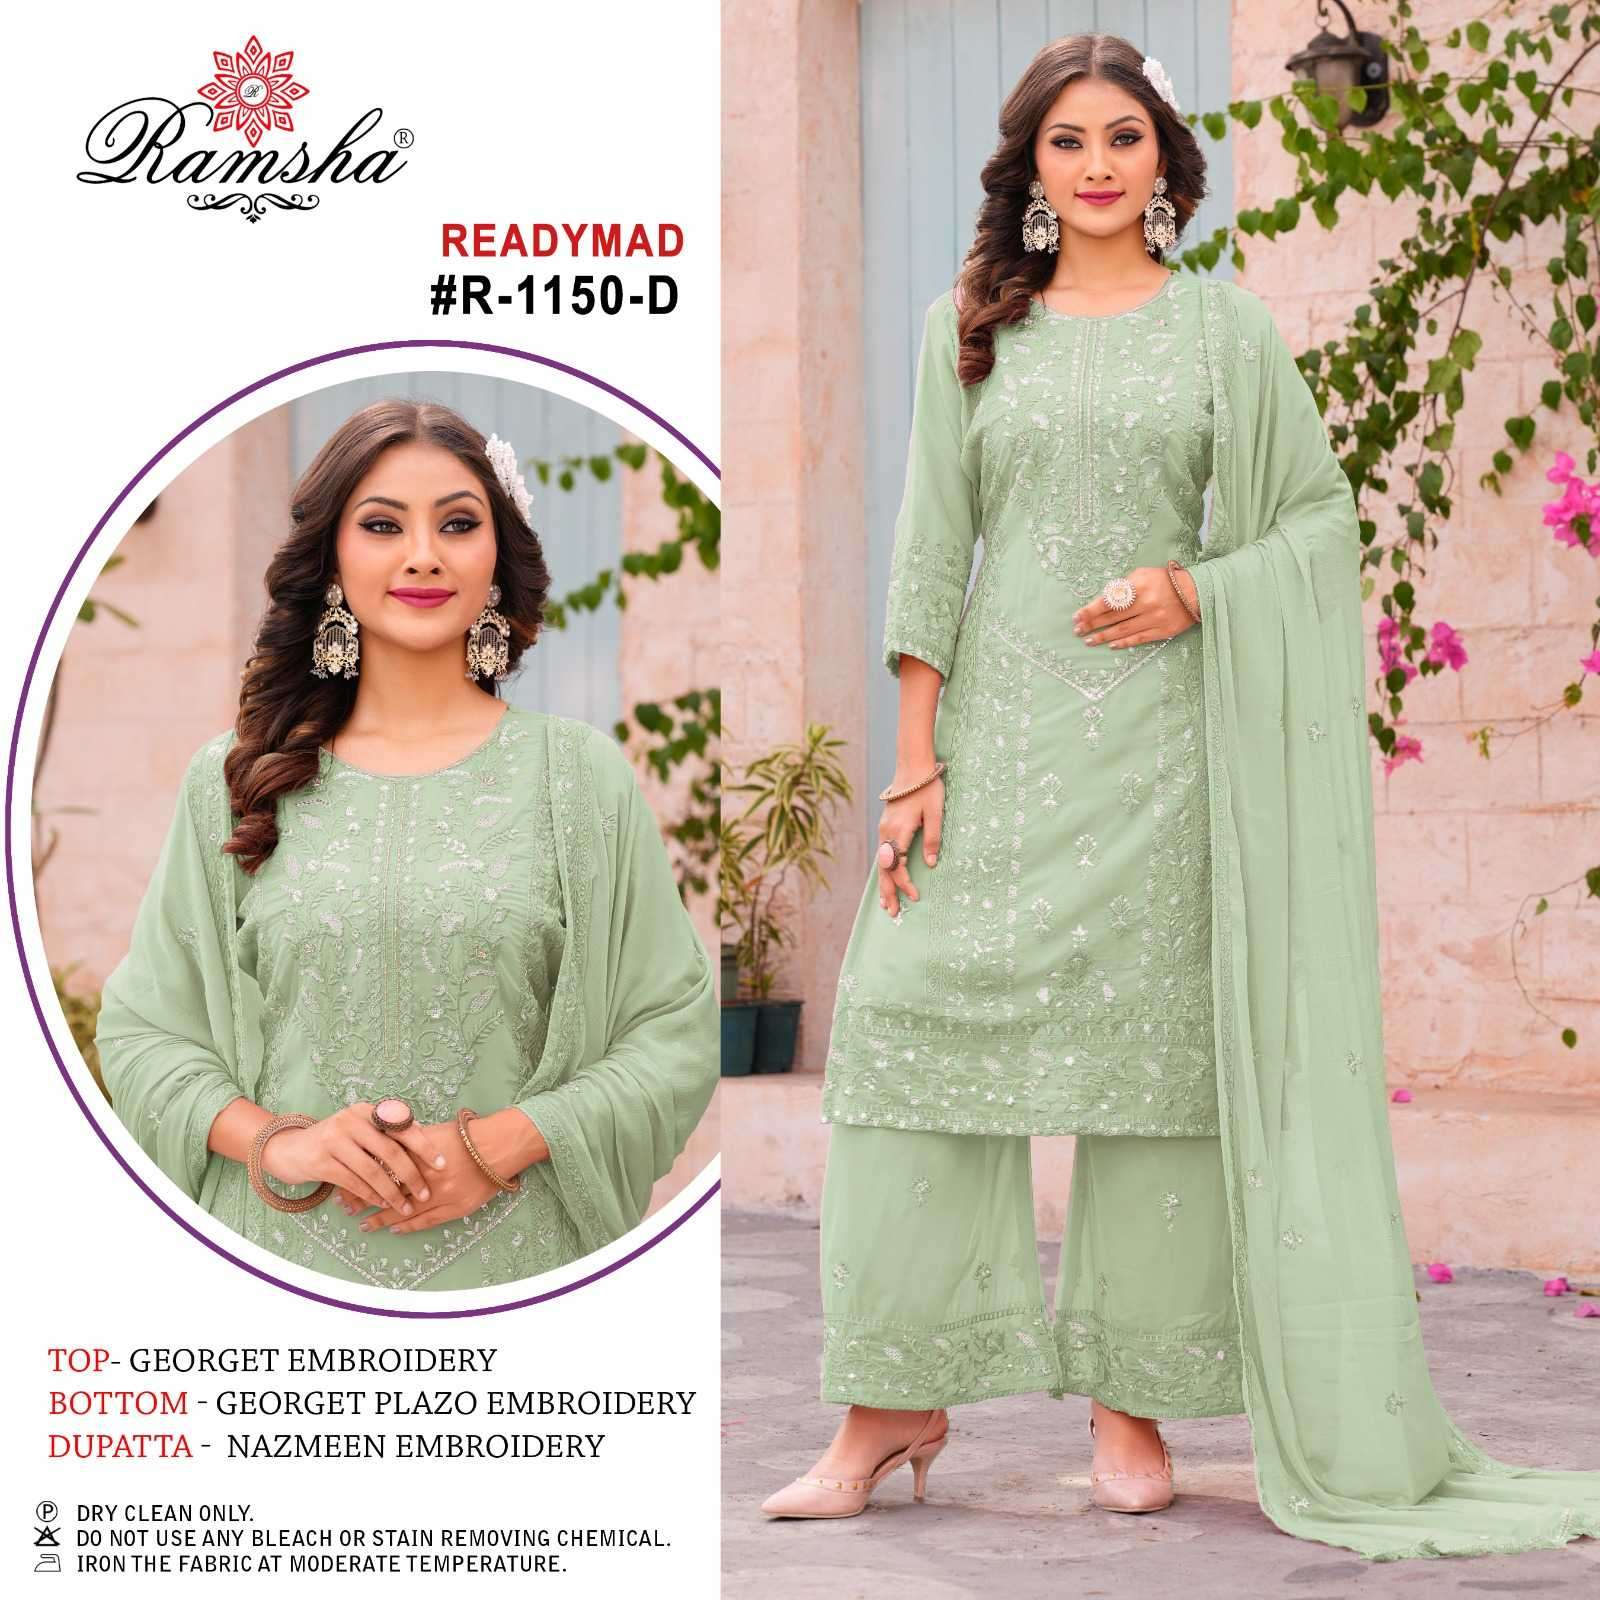 ramsha R-1150 nx georgette embroidery readymade suit 